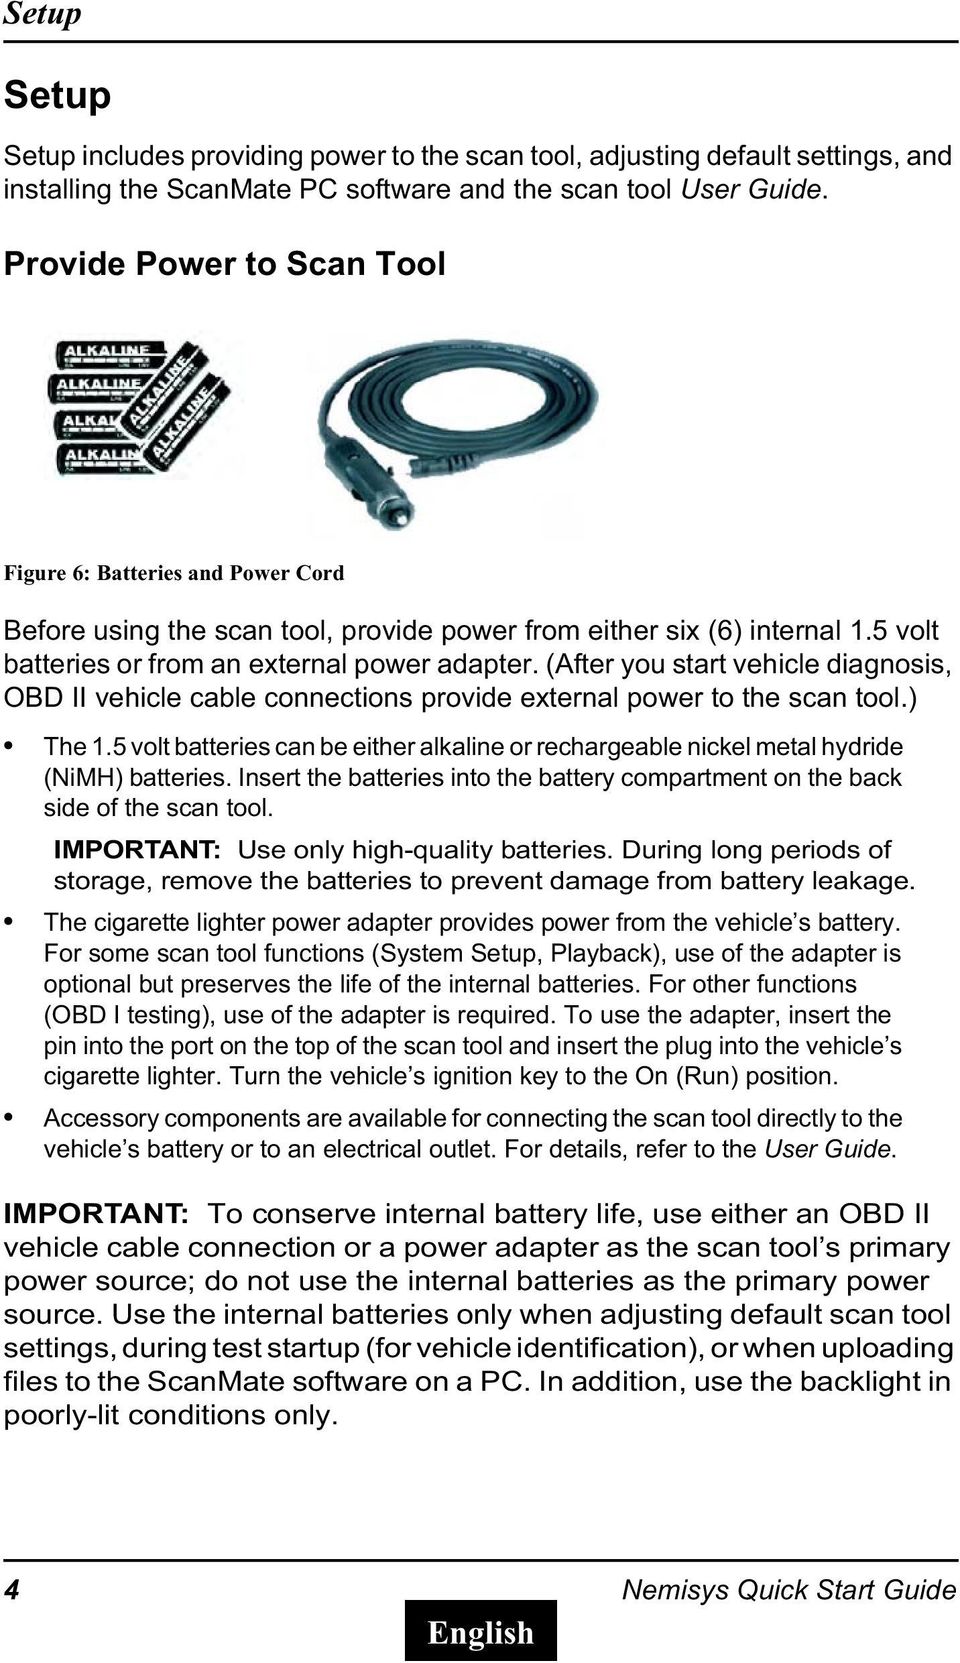 (After you start vehicle diagnosis, OBD II vehicle cable connections provide external power to the scan tool.) The 1.